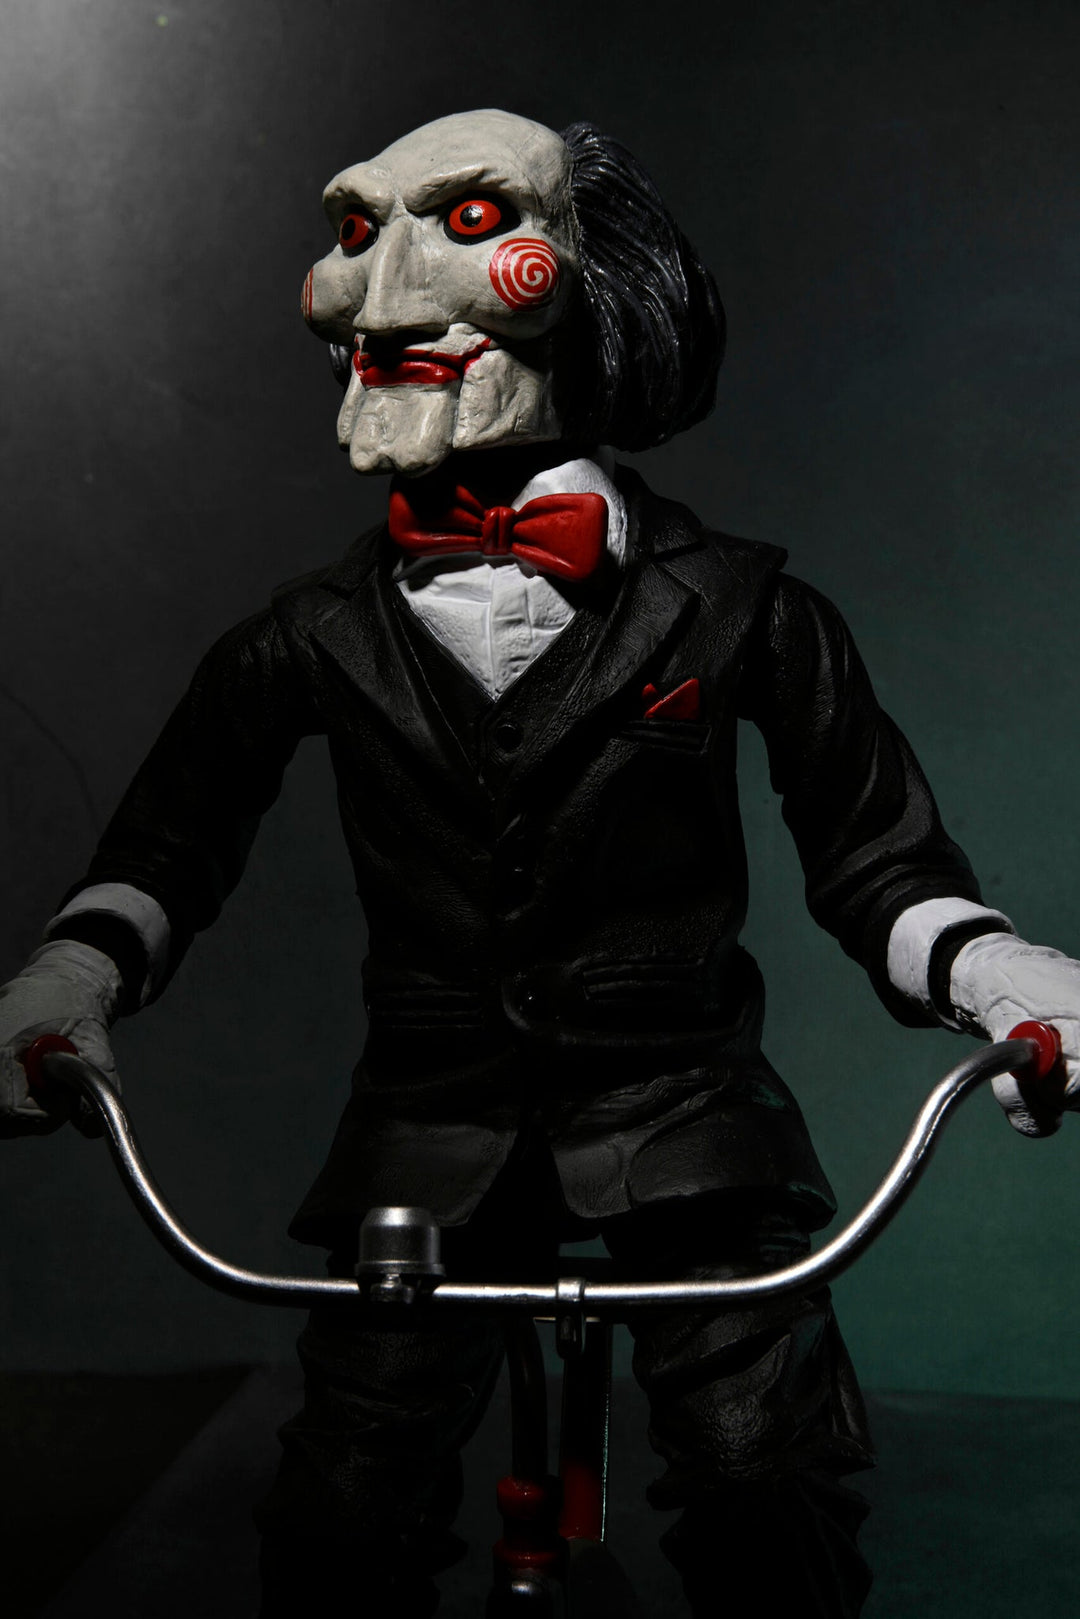 NECA Saw Billy the Puppet on Tricycle 12" Action Figure With Sound